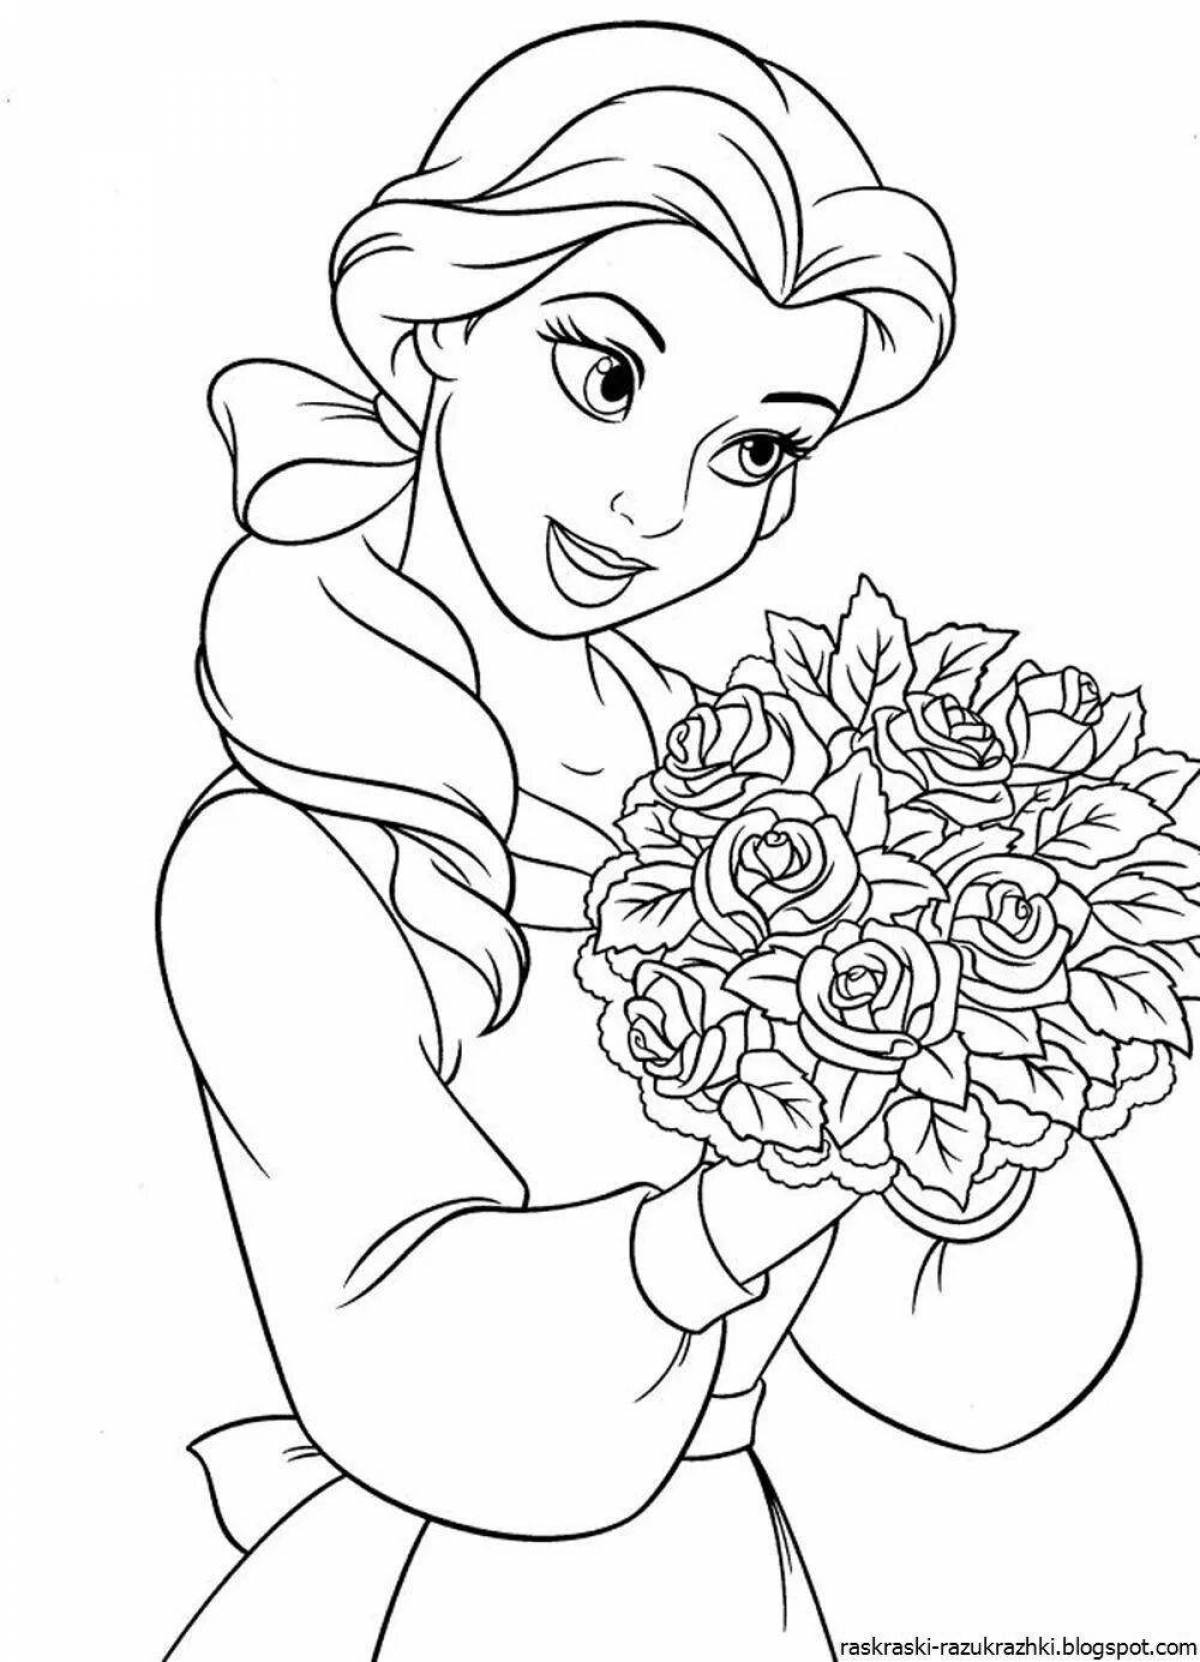 Adorable coloring book beautiful for kids